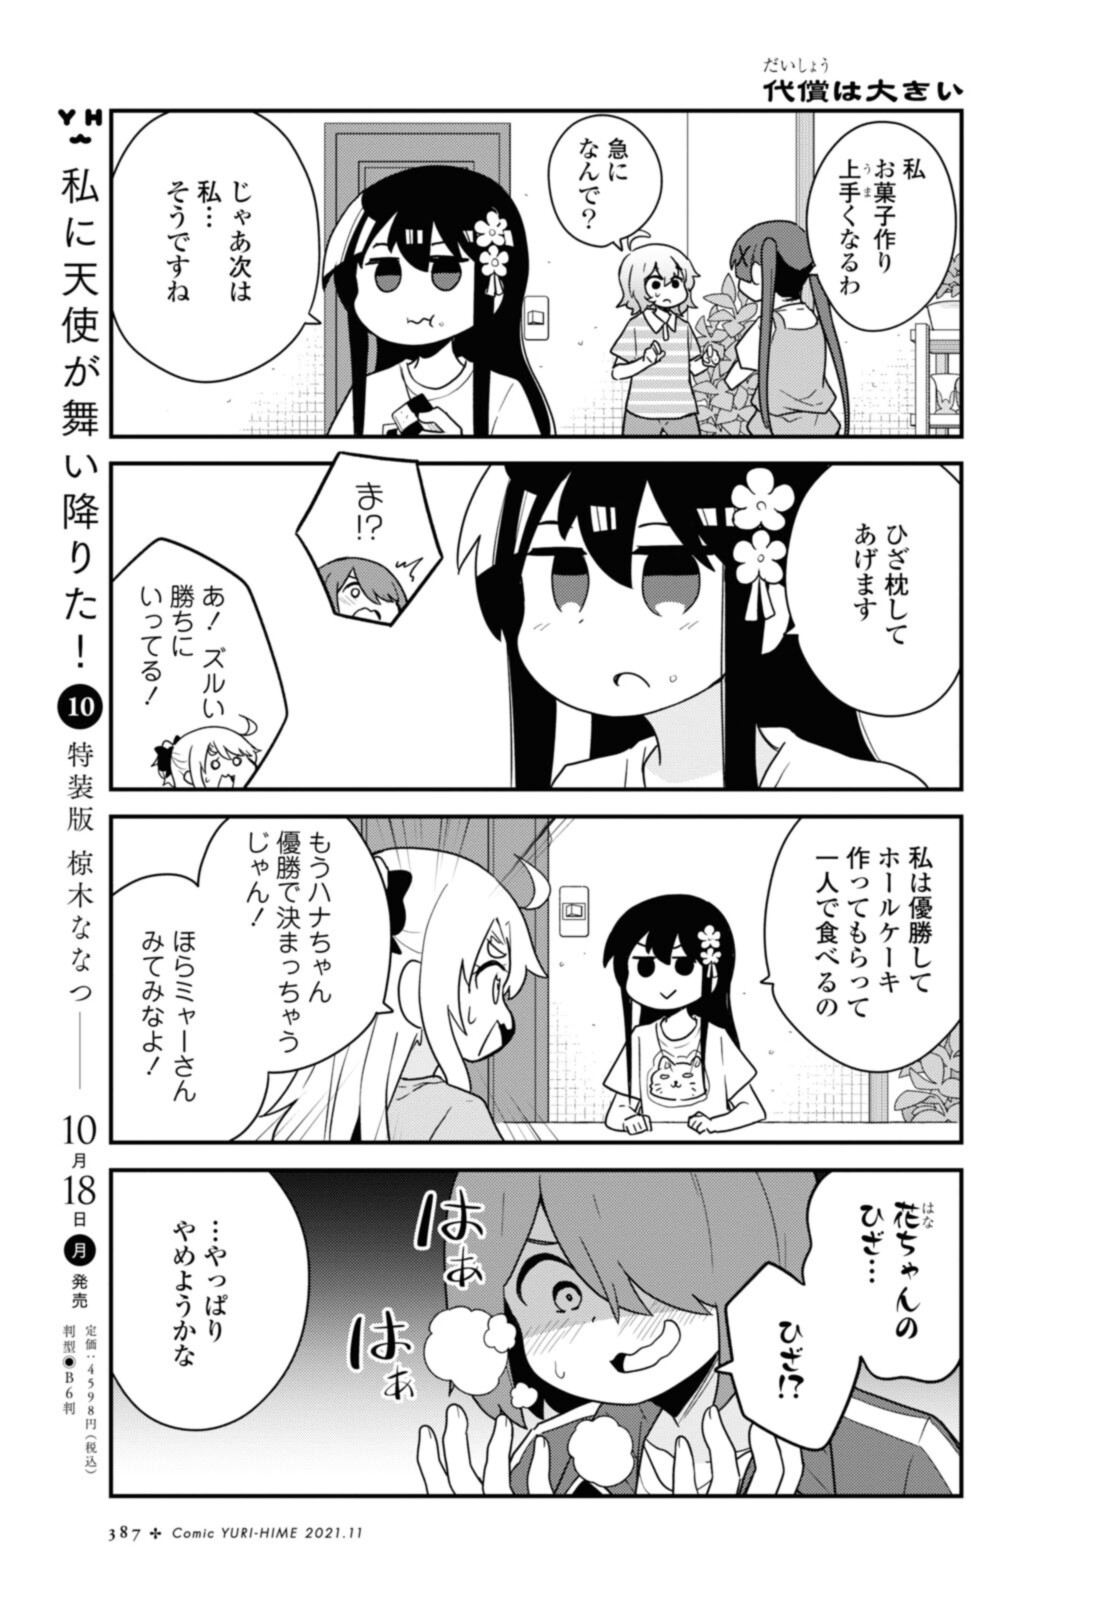 Wataten! An Angel Flew Down to Me 私に天使が舞い降りた！ 第87.1話 - Page 11